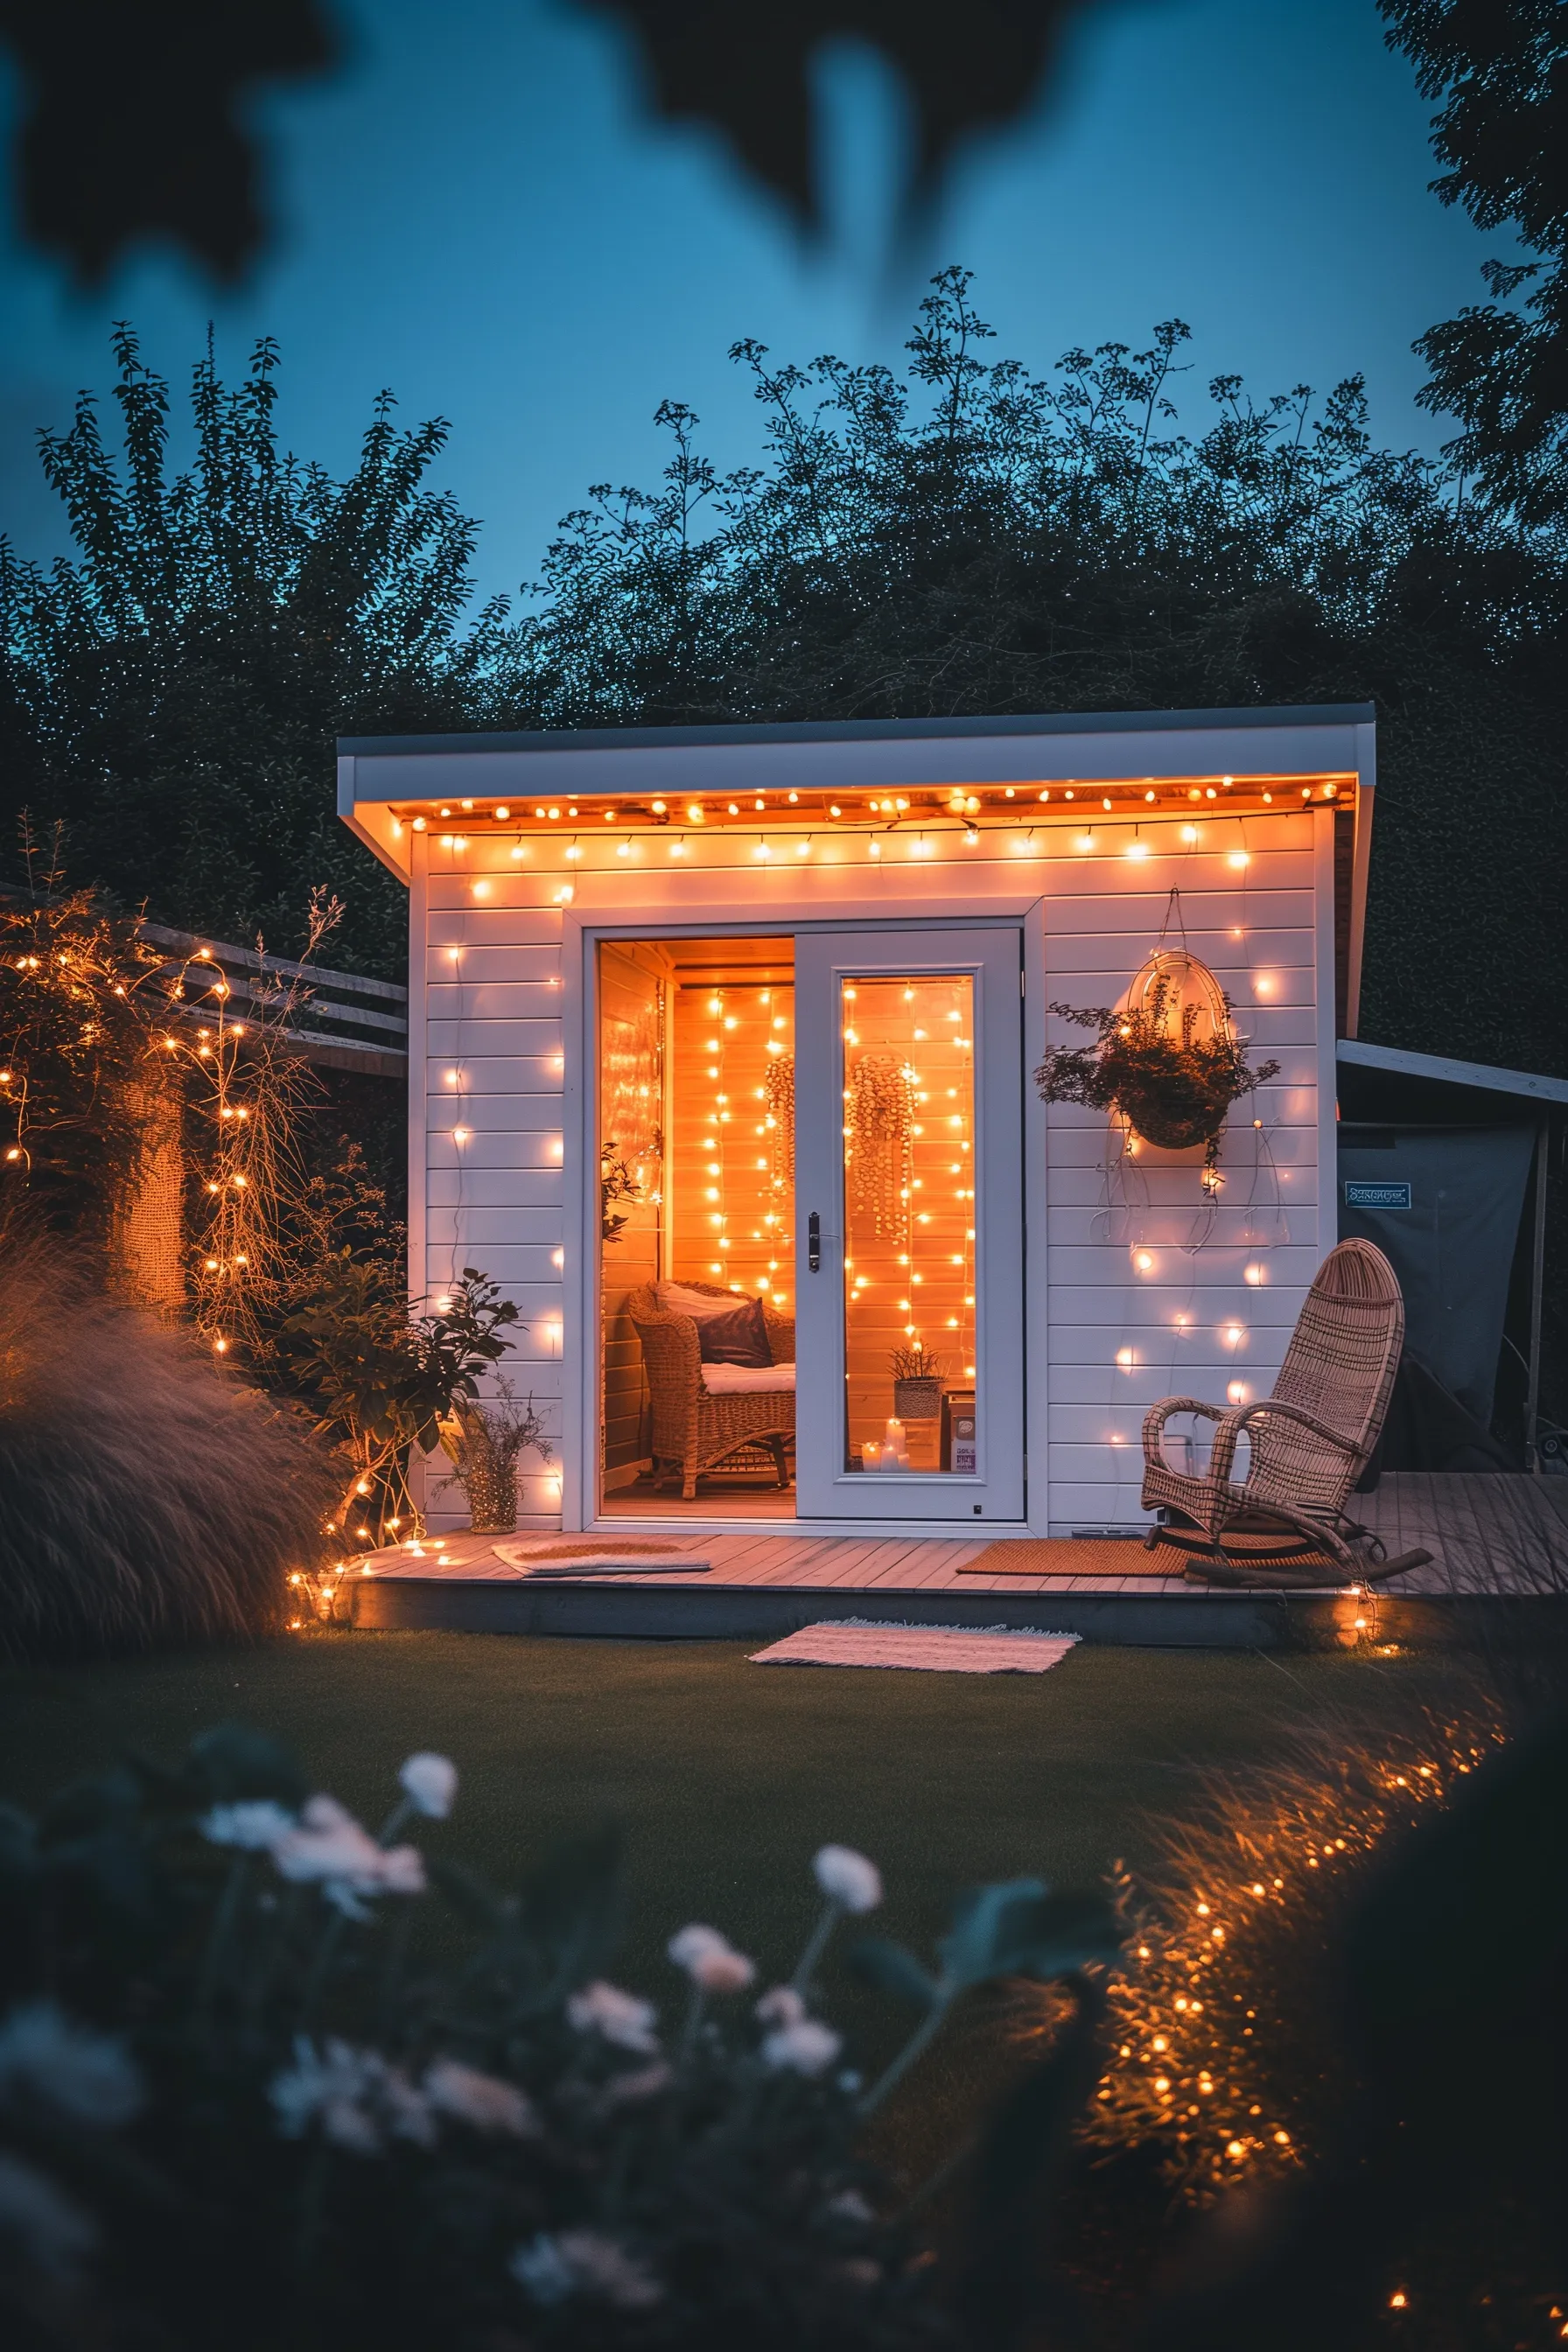 A studio shed with fairy lights